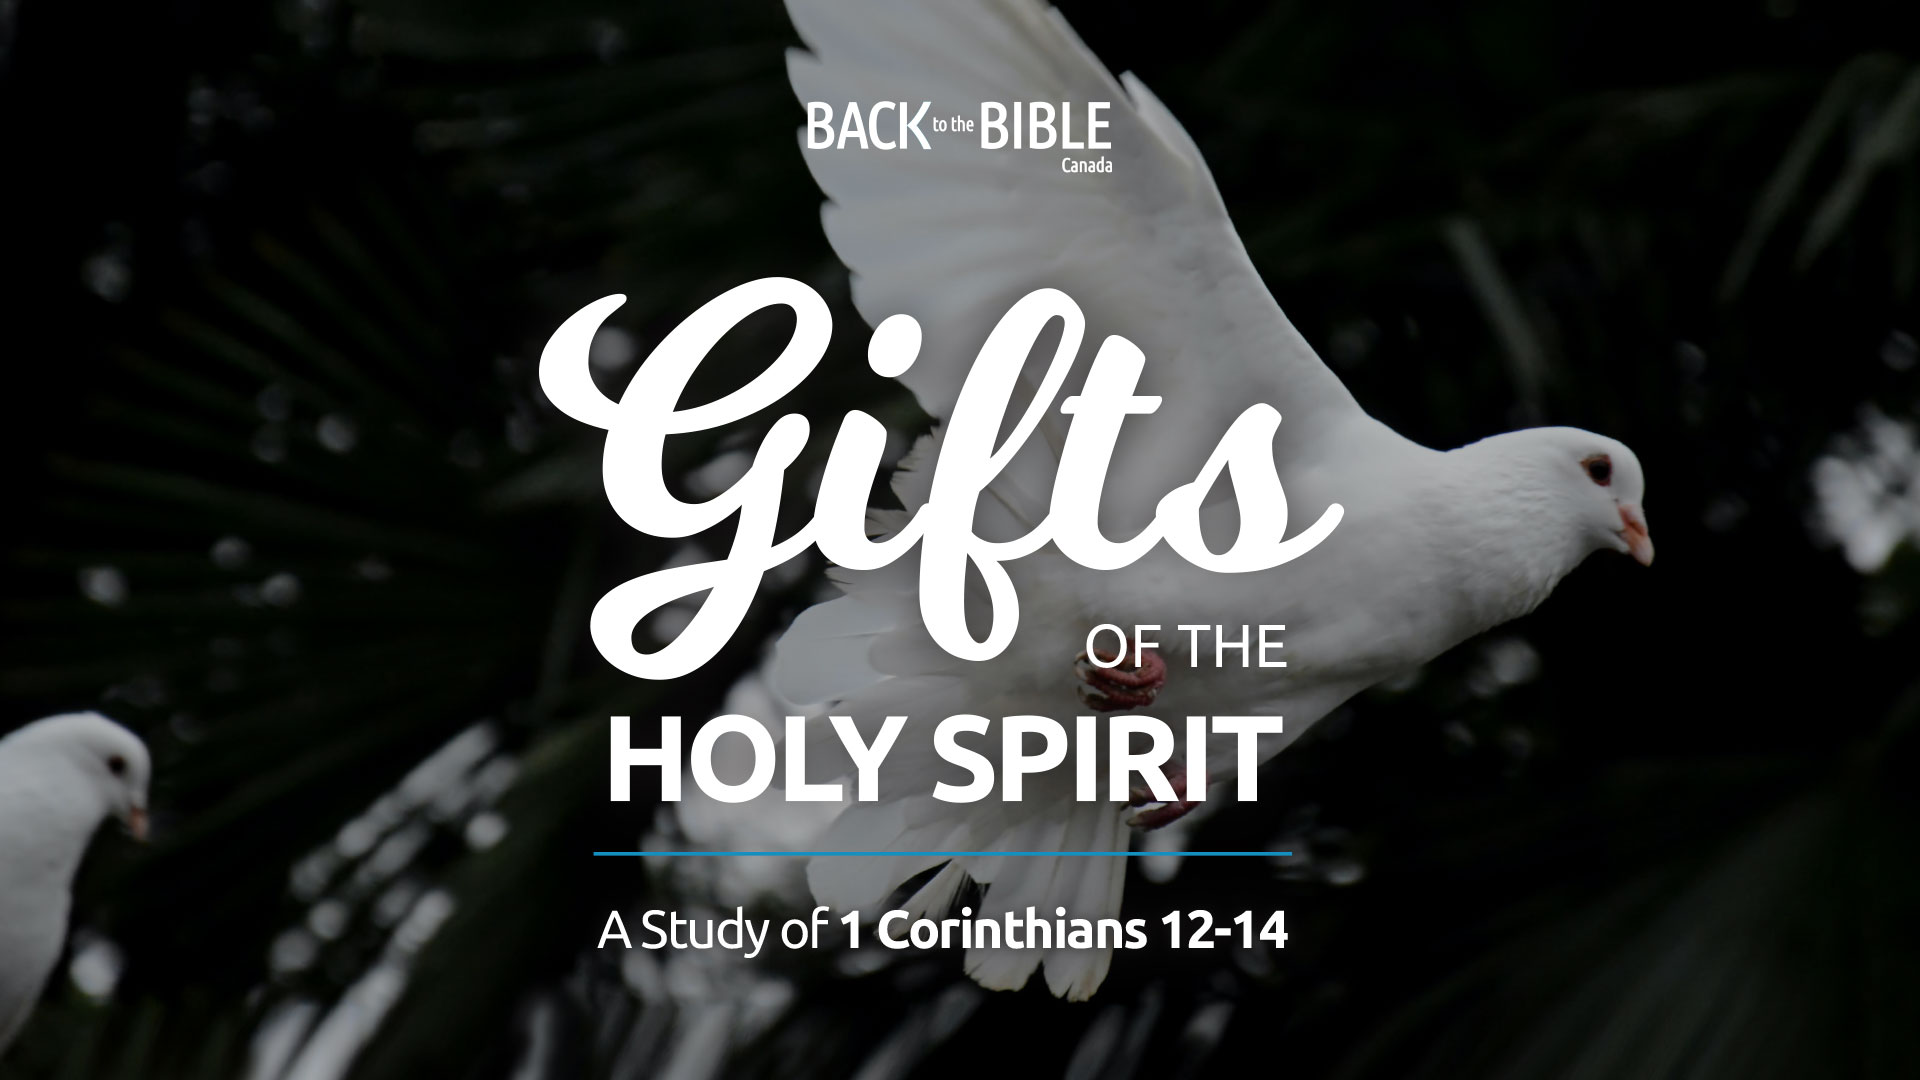 THE GIFTS OF THE HOLY SPIRIT - THE GIFT OF UNDERSTANDING